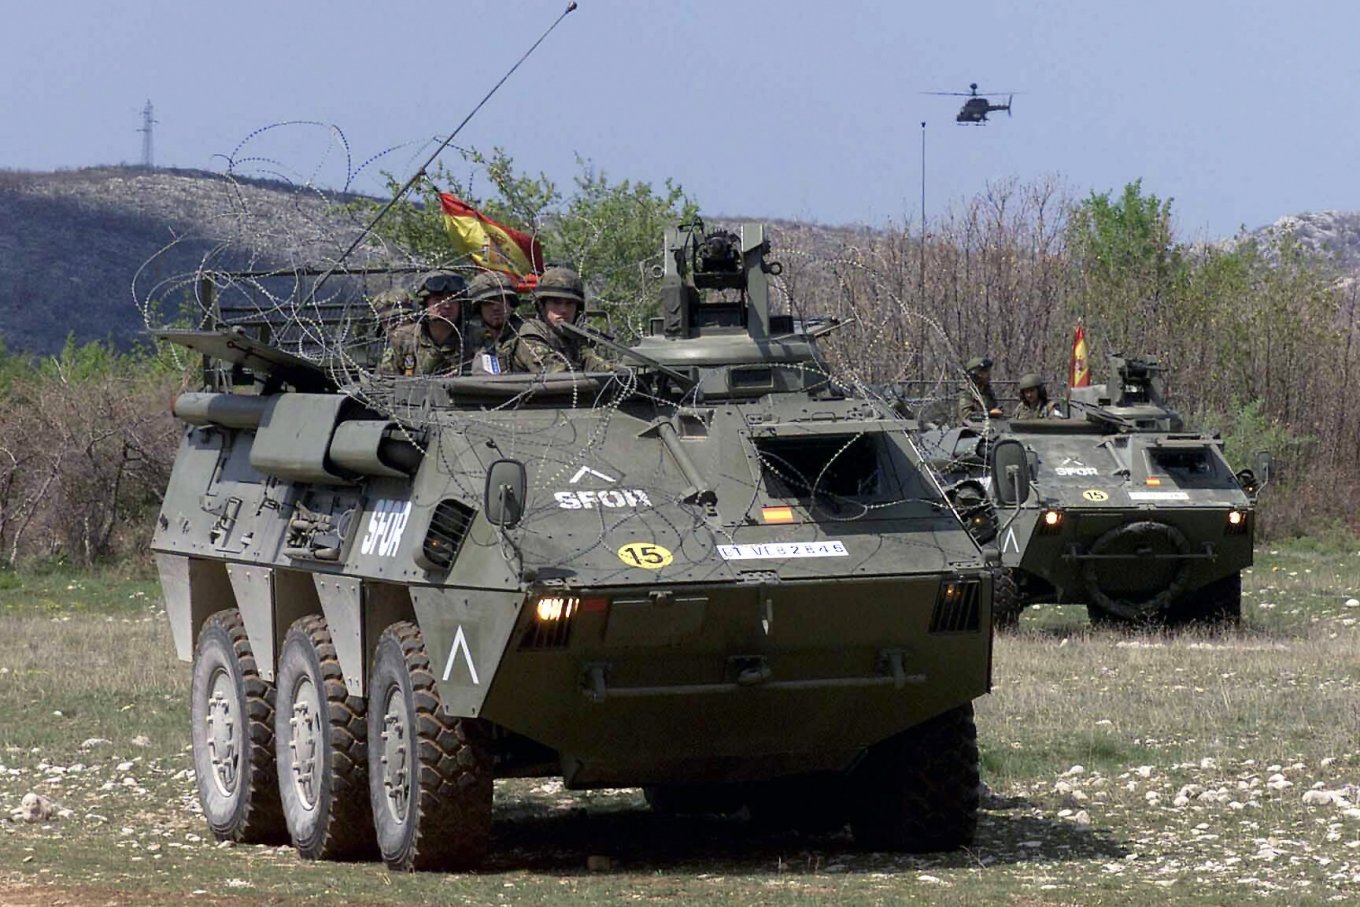 The BMR 3560.50 (BMR-PP) vehicle Defense Express The Armed Forces of Ukraine Possess an Incredibly Rare Spanish Armored Vehicle